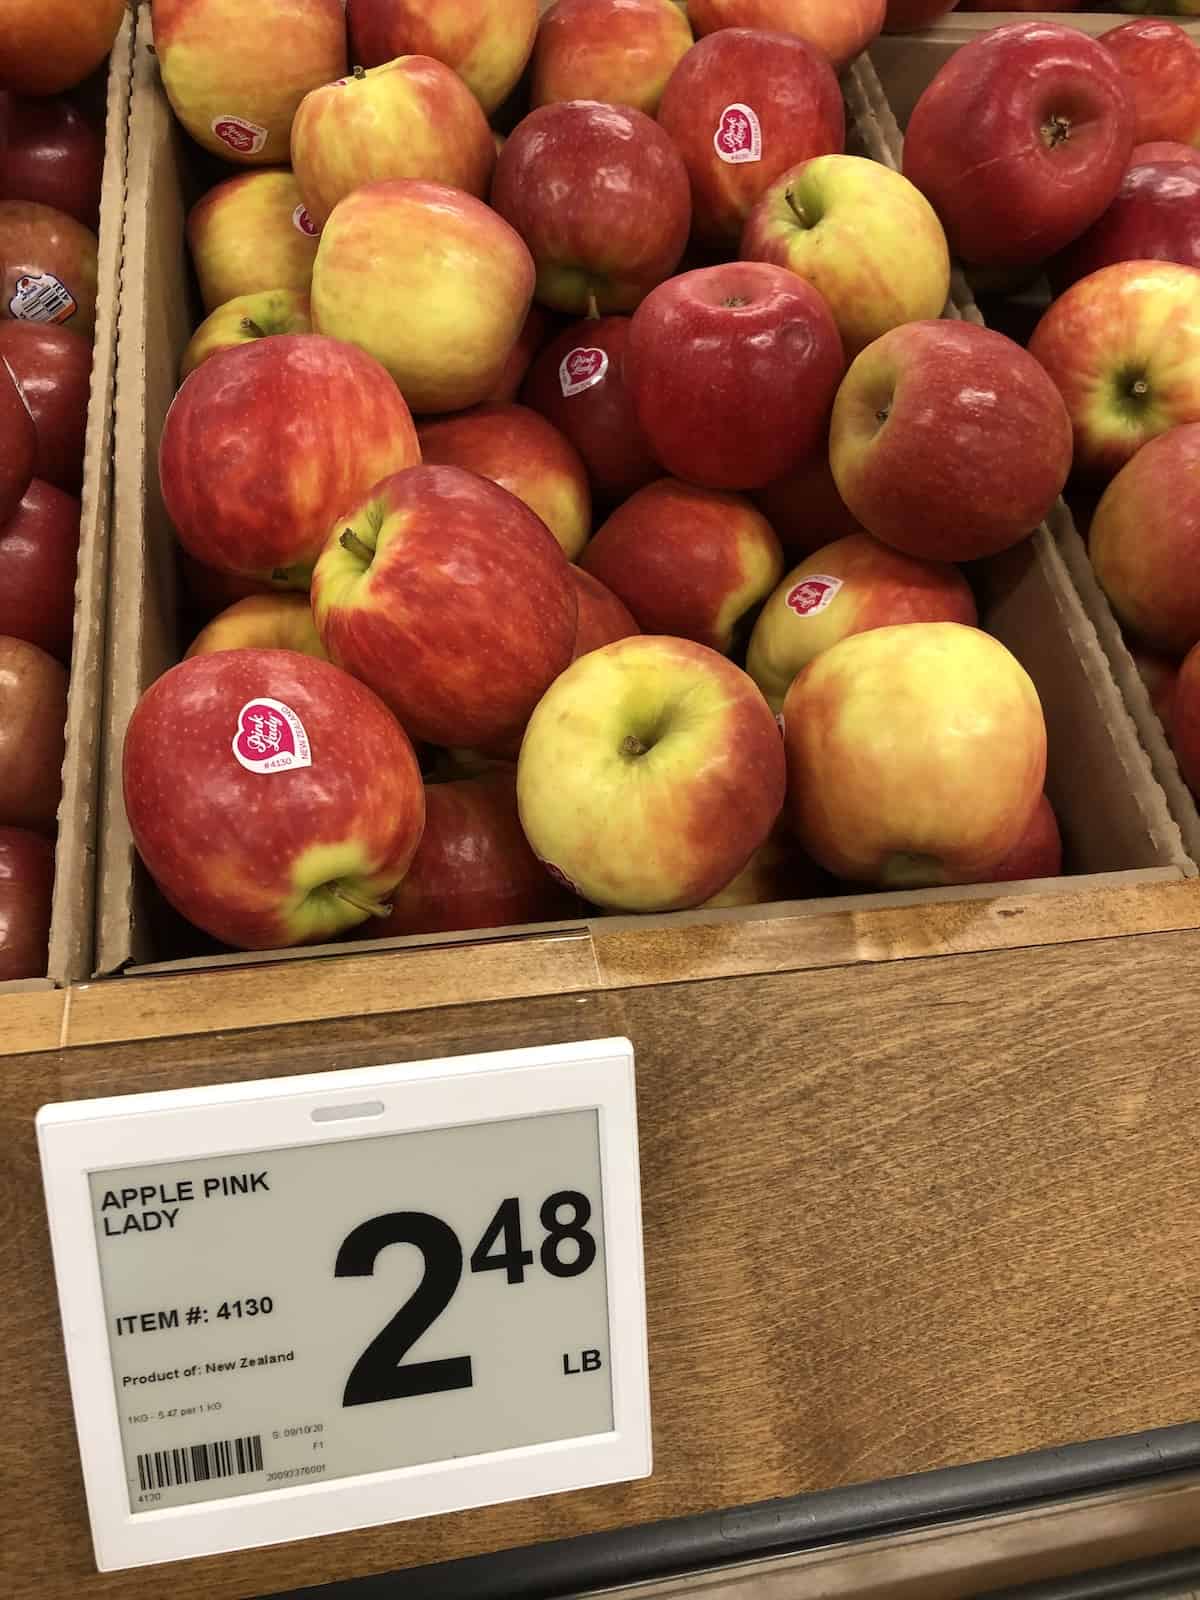 Price tag of $2. 48 per lb for pink lady apples at grocery store